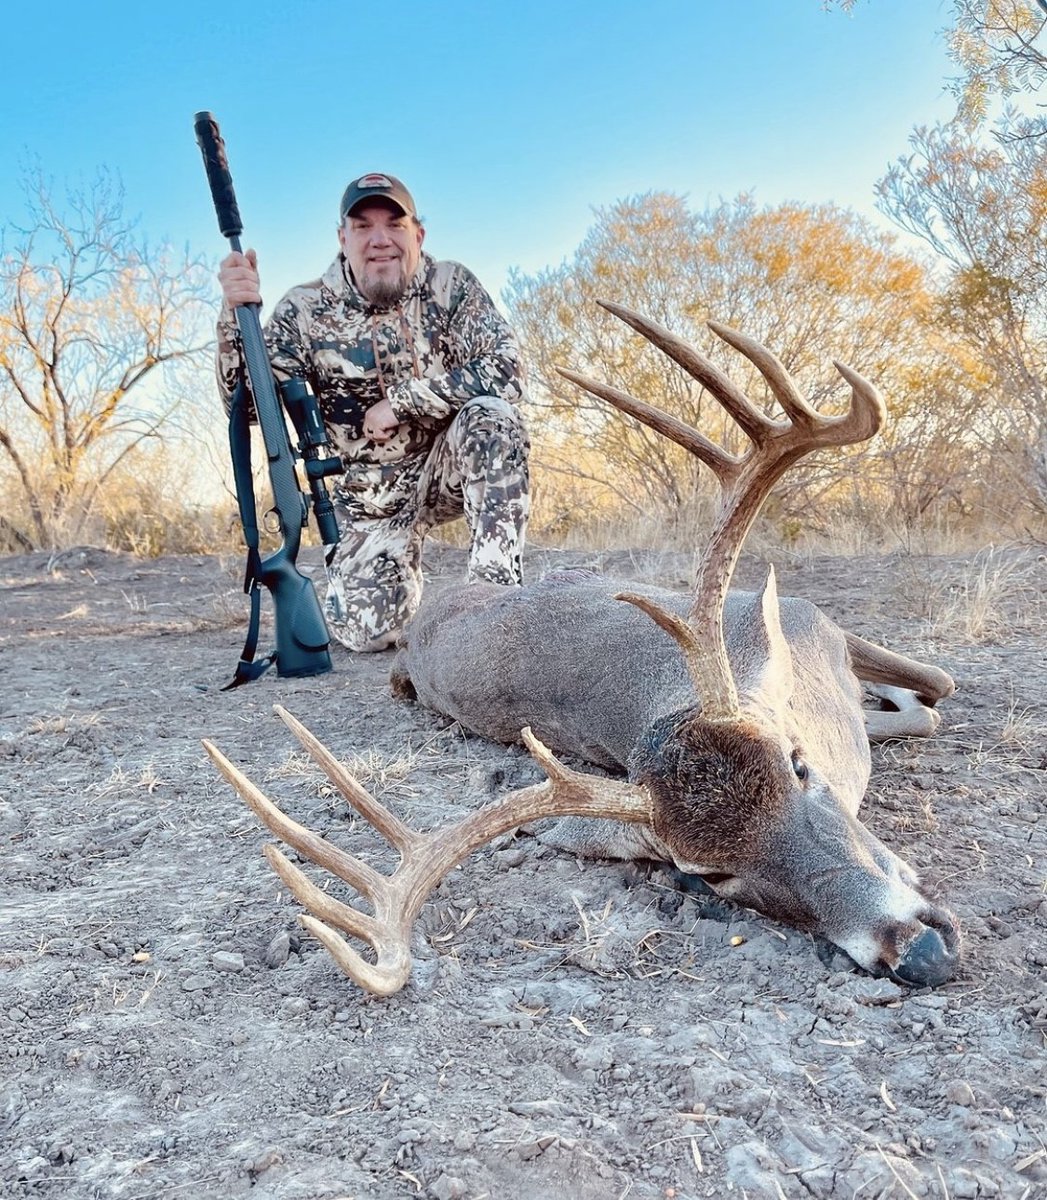 Congrats to our pal Jon, he got the job done! - Addicted To The Outdoors With Jon And Gina #hunting #deerhunting #TacoTuesday #tuesdayvibe #TuesdayFeeling #thicktrunktuesday #DeNiro #BDSP #TheNine #mosquitos #NYPD #Unova #MondayMotivation #Mondayvibes #Staunton #Maya #Ofcom